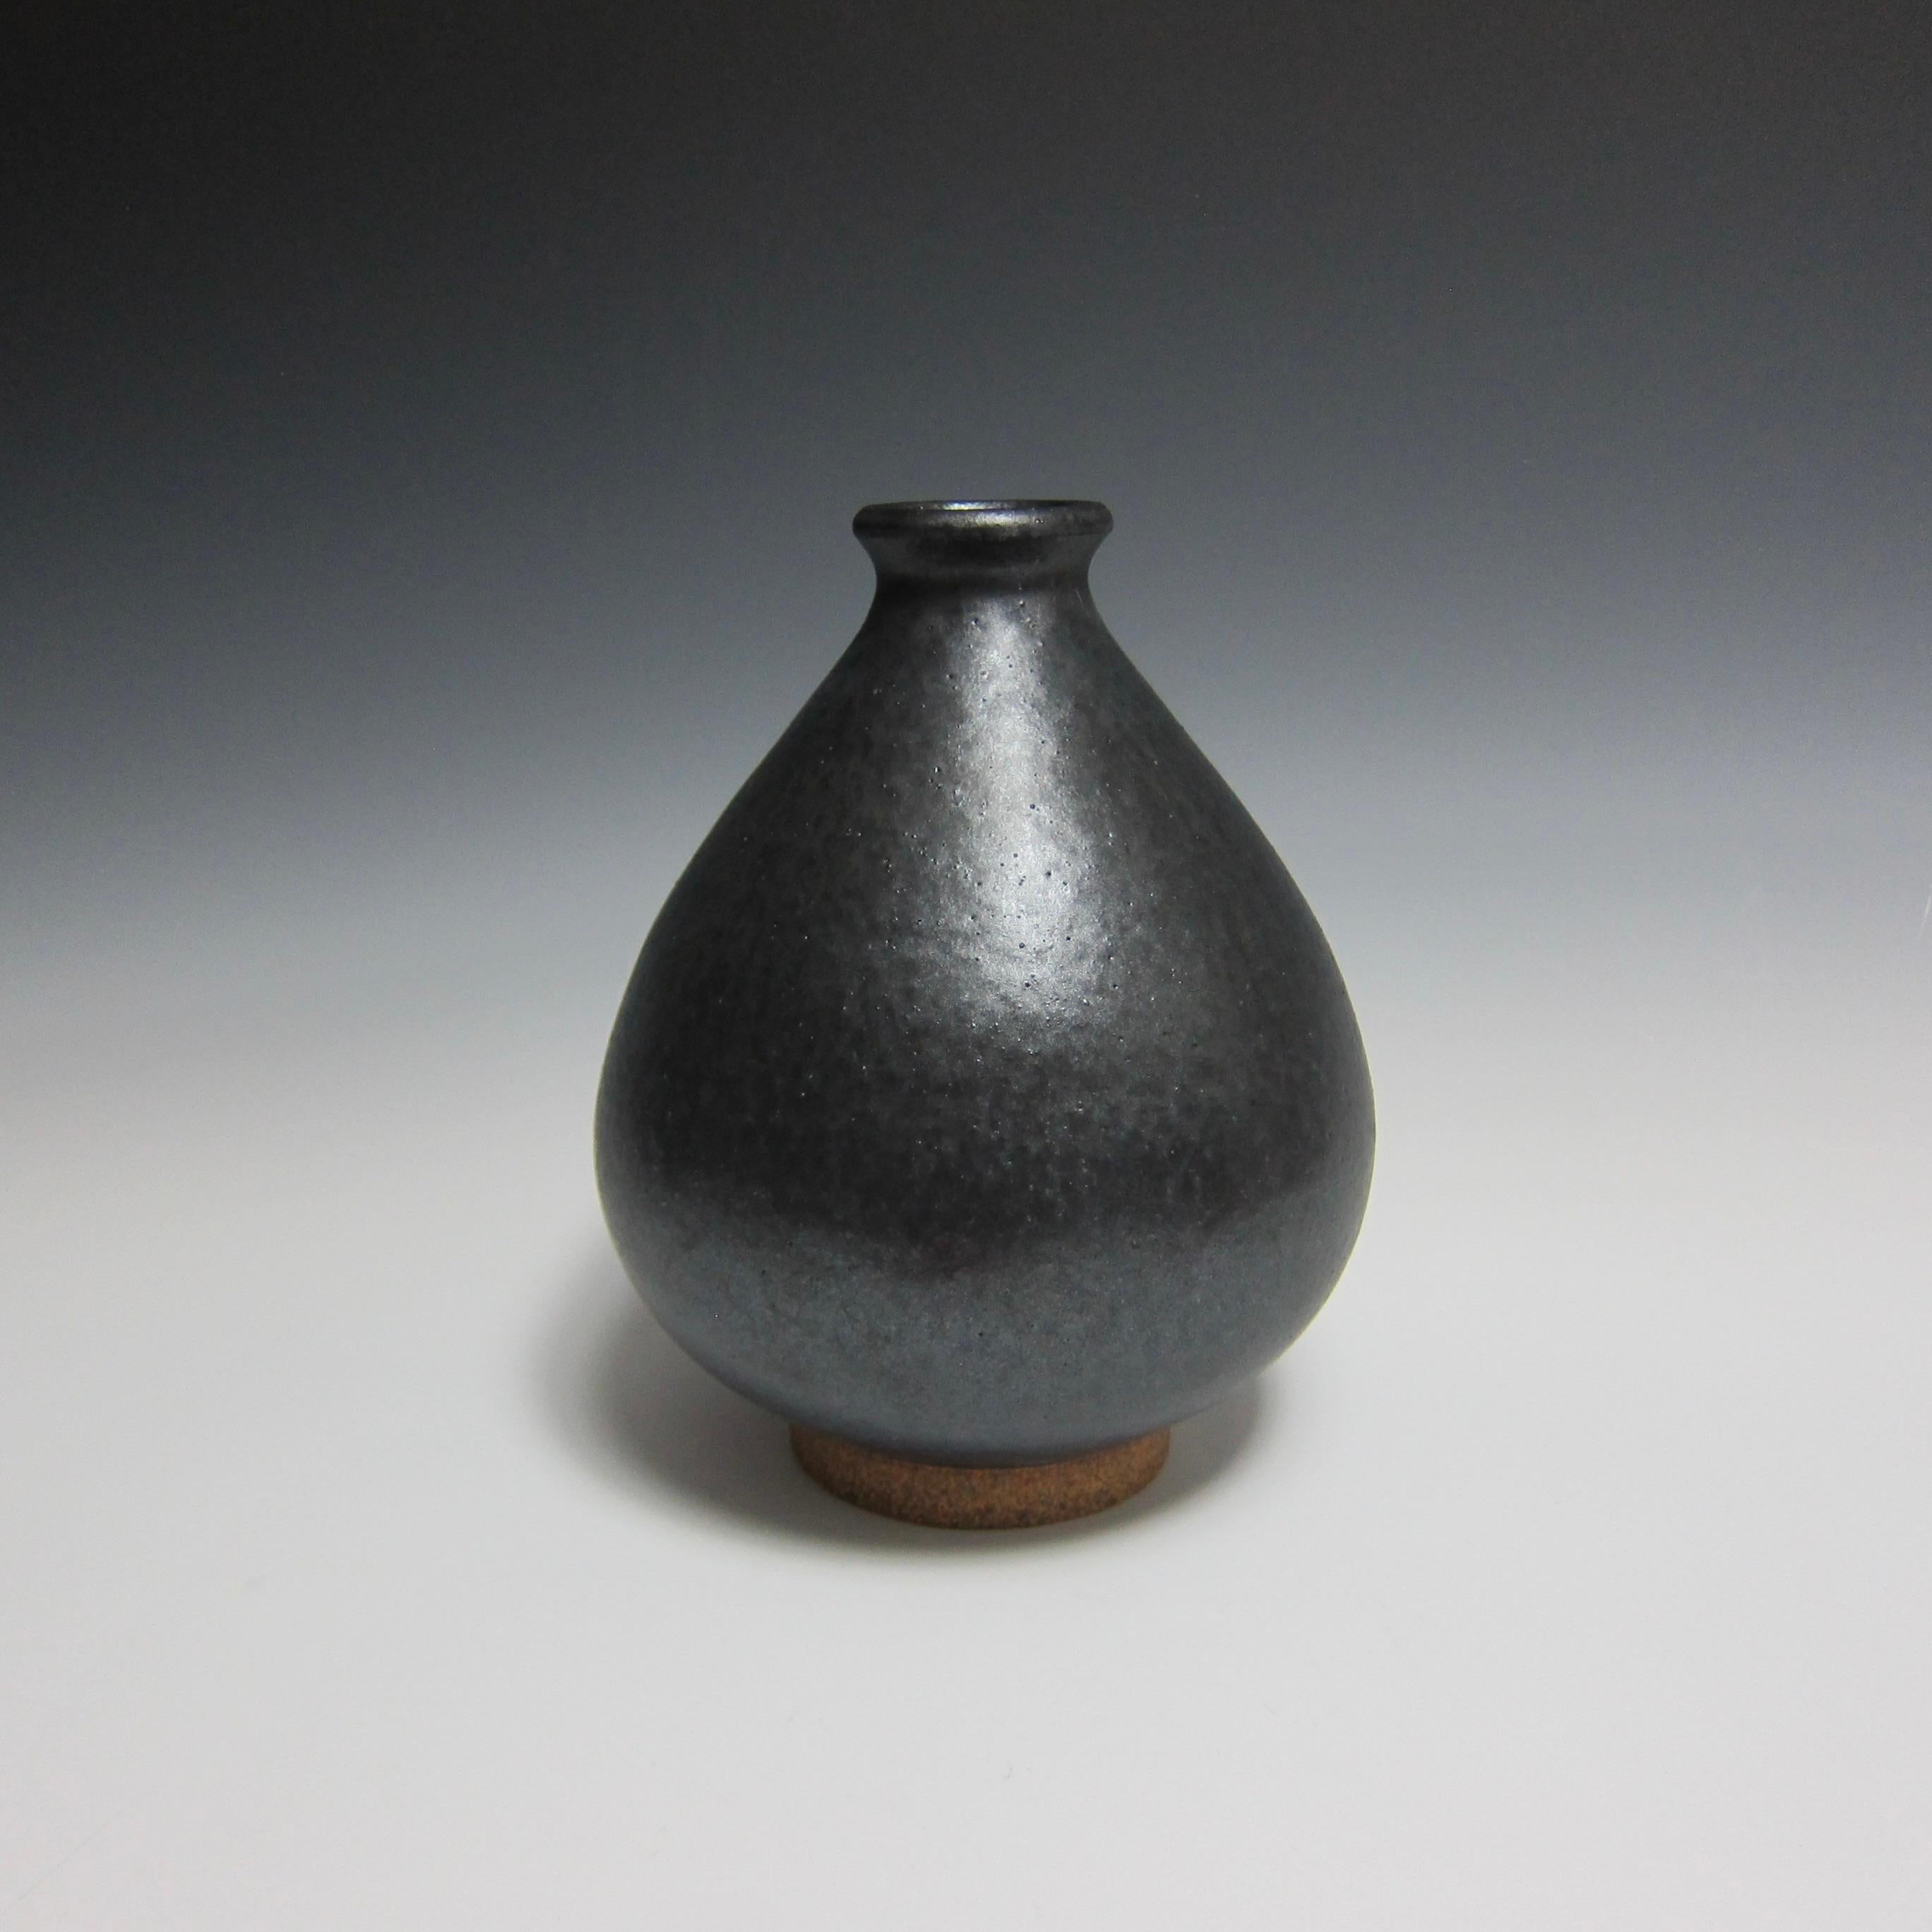 Wheel Thrown Ceramic Vase / Flower Bottle by Jason Fox

Part of his Flower Bottle Series, American contemporary ceramic artist Jason Fox borrows inspiration from the antique Korean silhouette of the same name to create a vase perfect for both wet